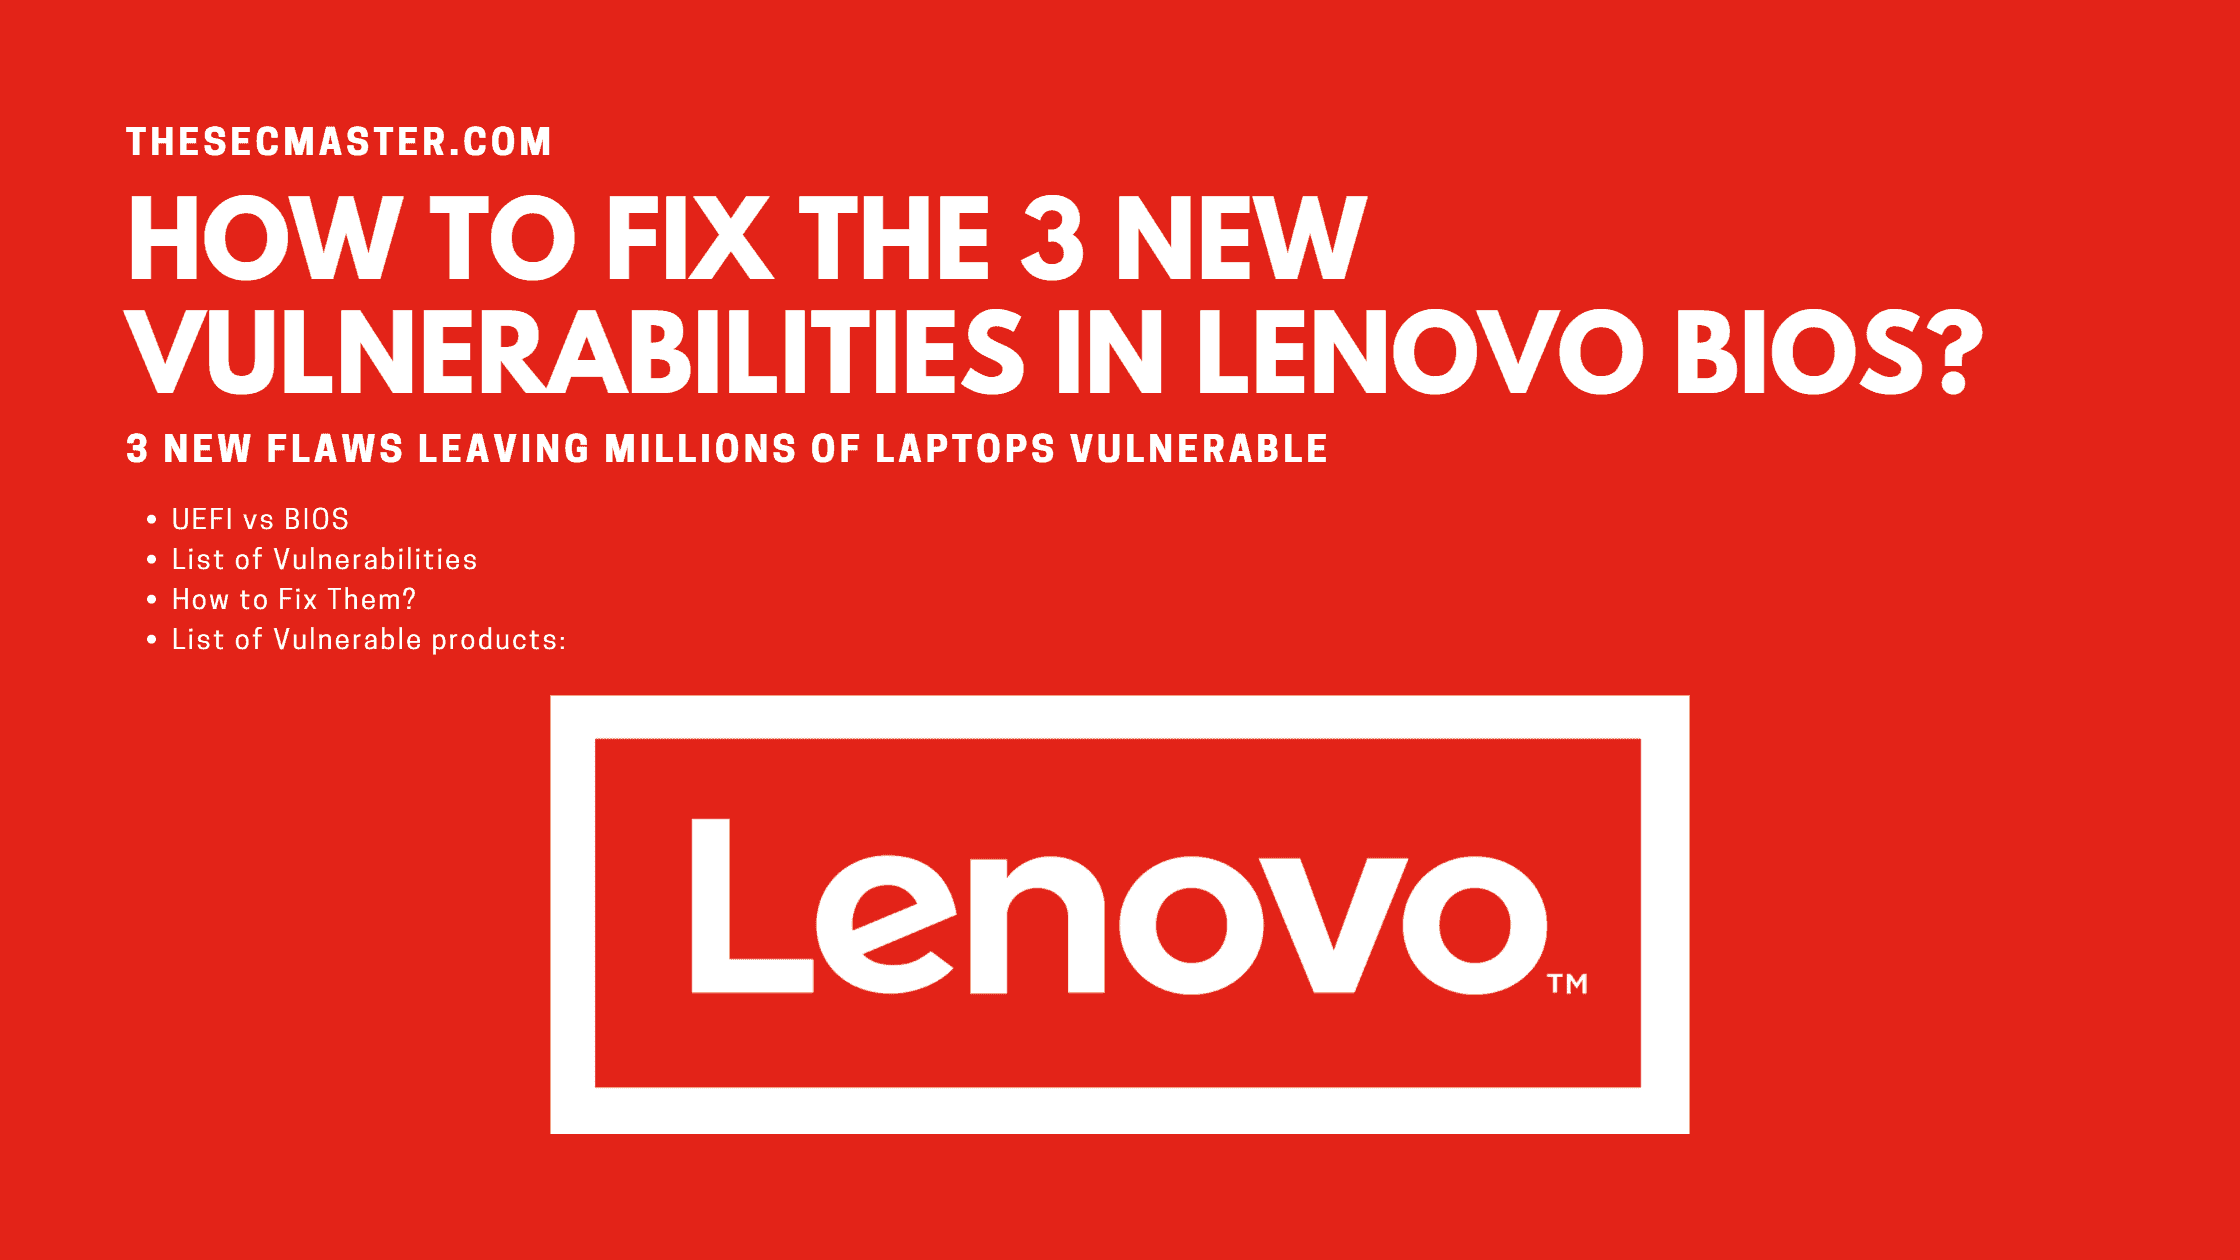 How To Fix The 3 New Vulnerabilities In Lenovo Bios